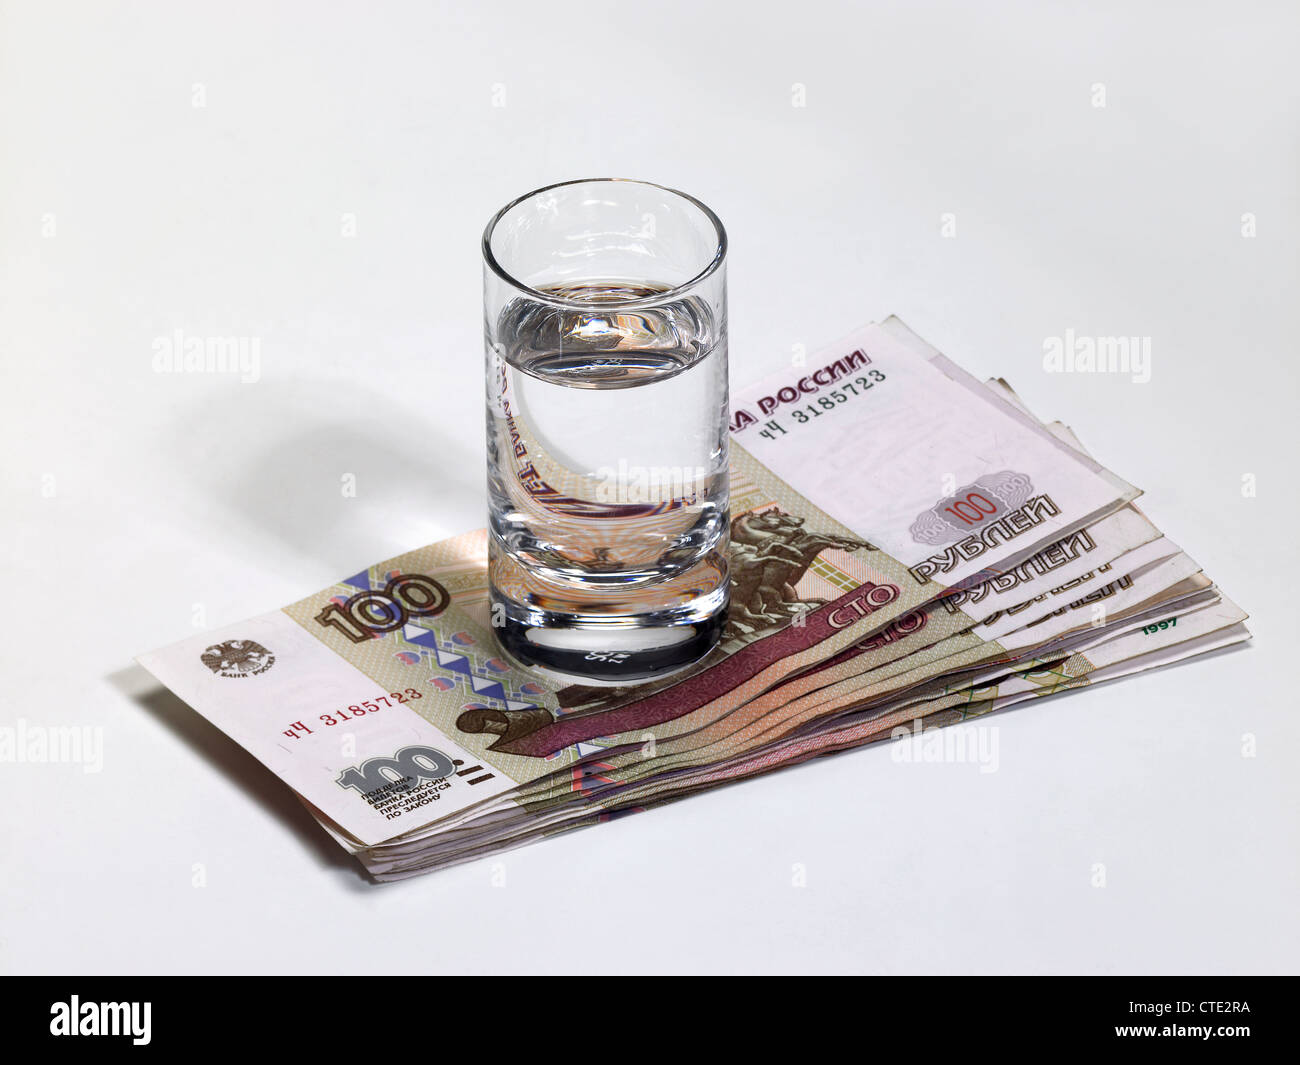 Pile of Russian ruble notes with a glass of vodka Stock Photo